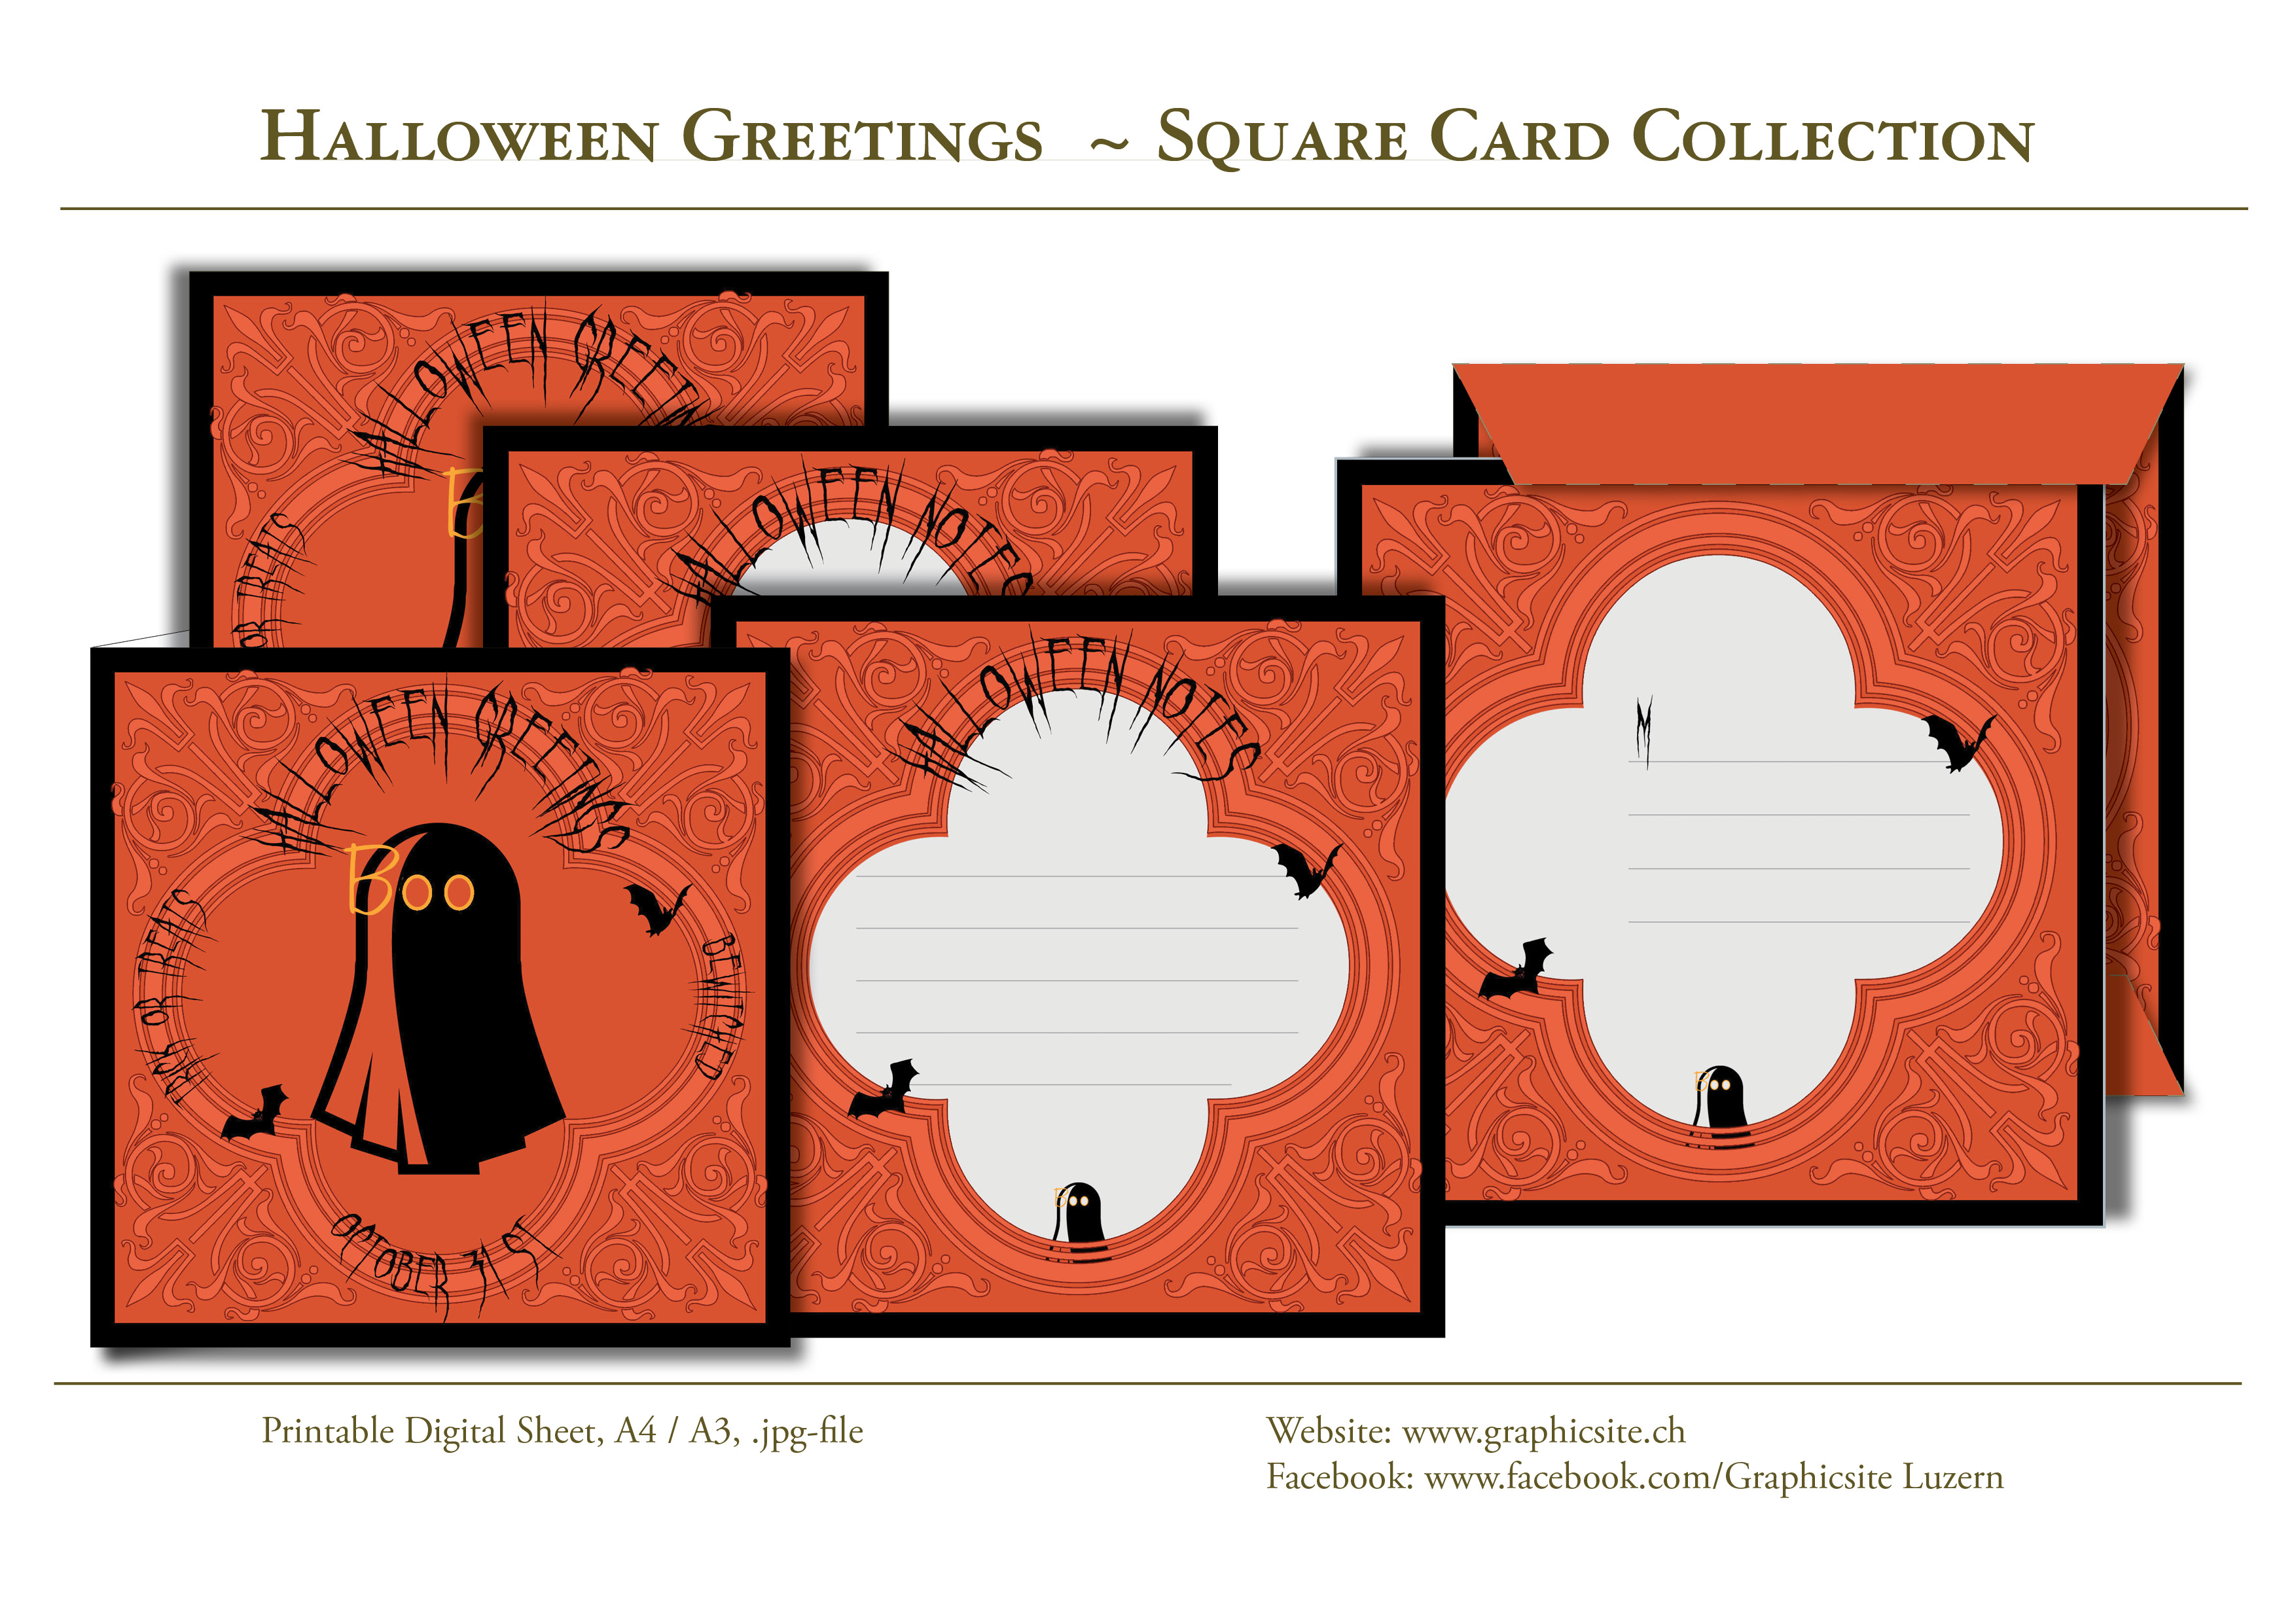 Printable Digital Sheets - Square Card Collection - Halloween Greetings - Spooky - Graphic Design - Luzern,